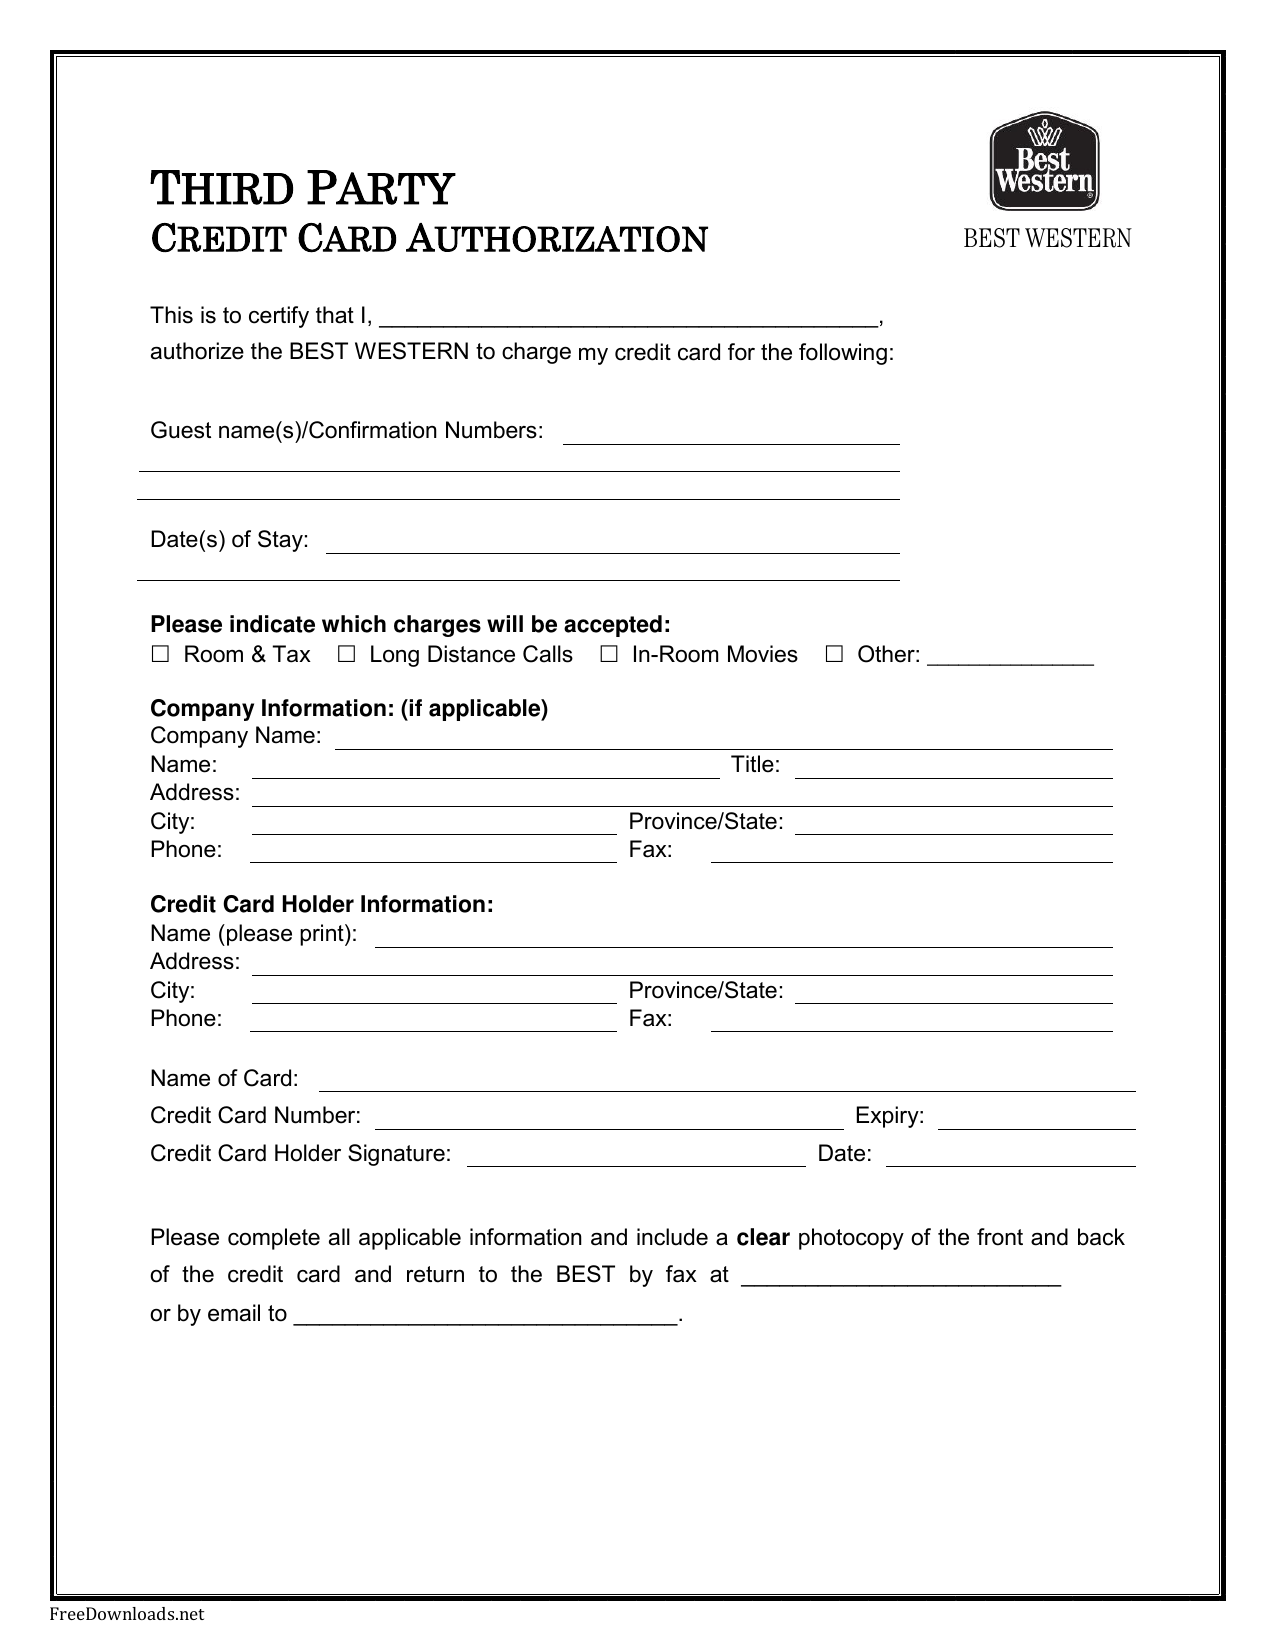 Download Best Western Credit Card Authorization Form Template Intended For Corporate Credit Card Agreement Template